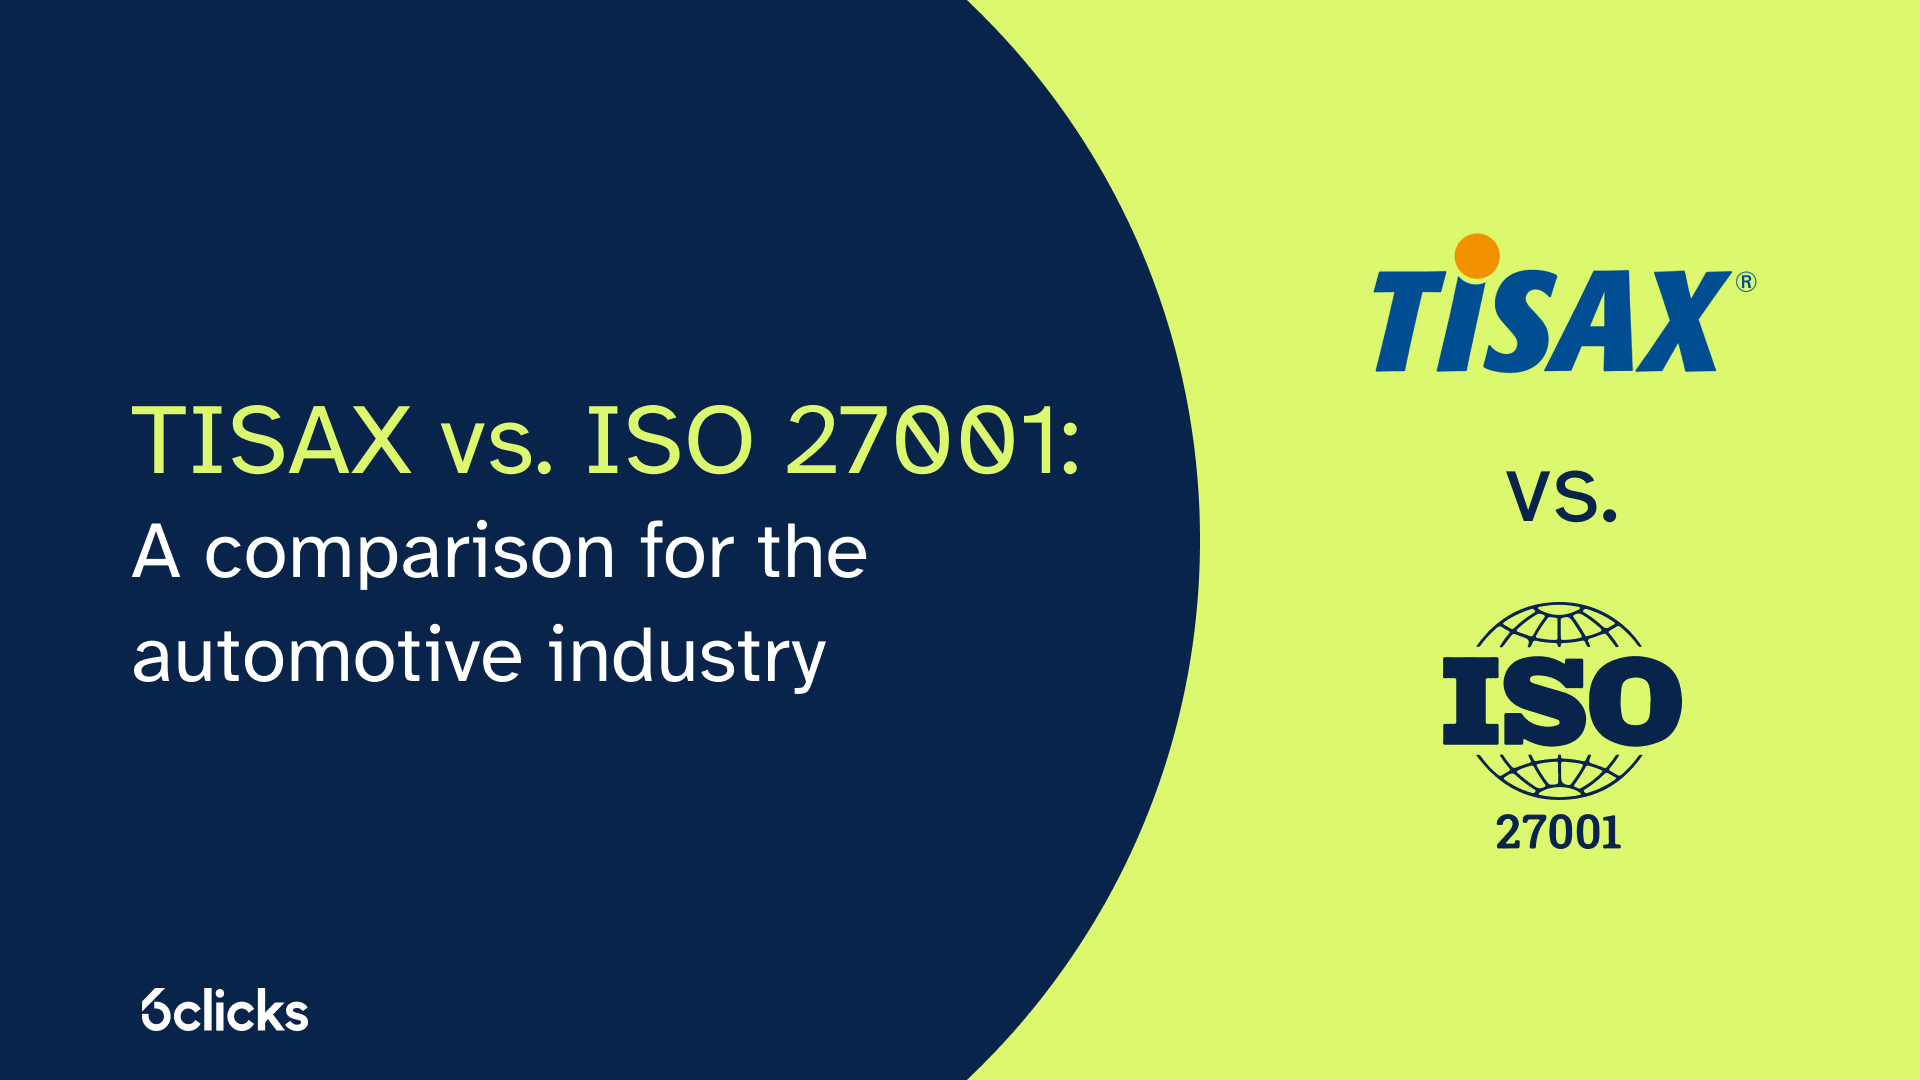 TISAX vs. ISO 27001: A comparison for the automotive industry